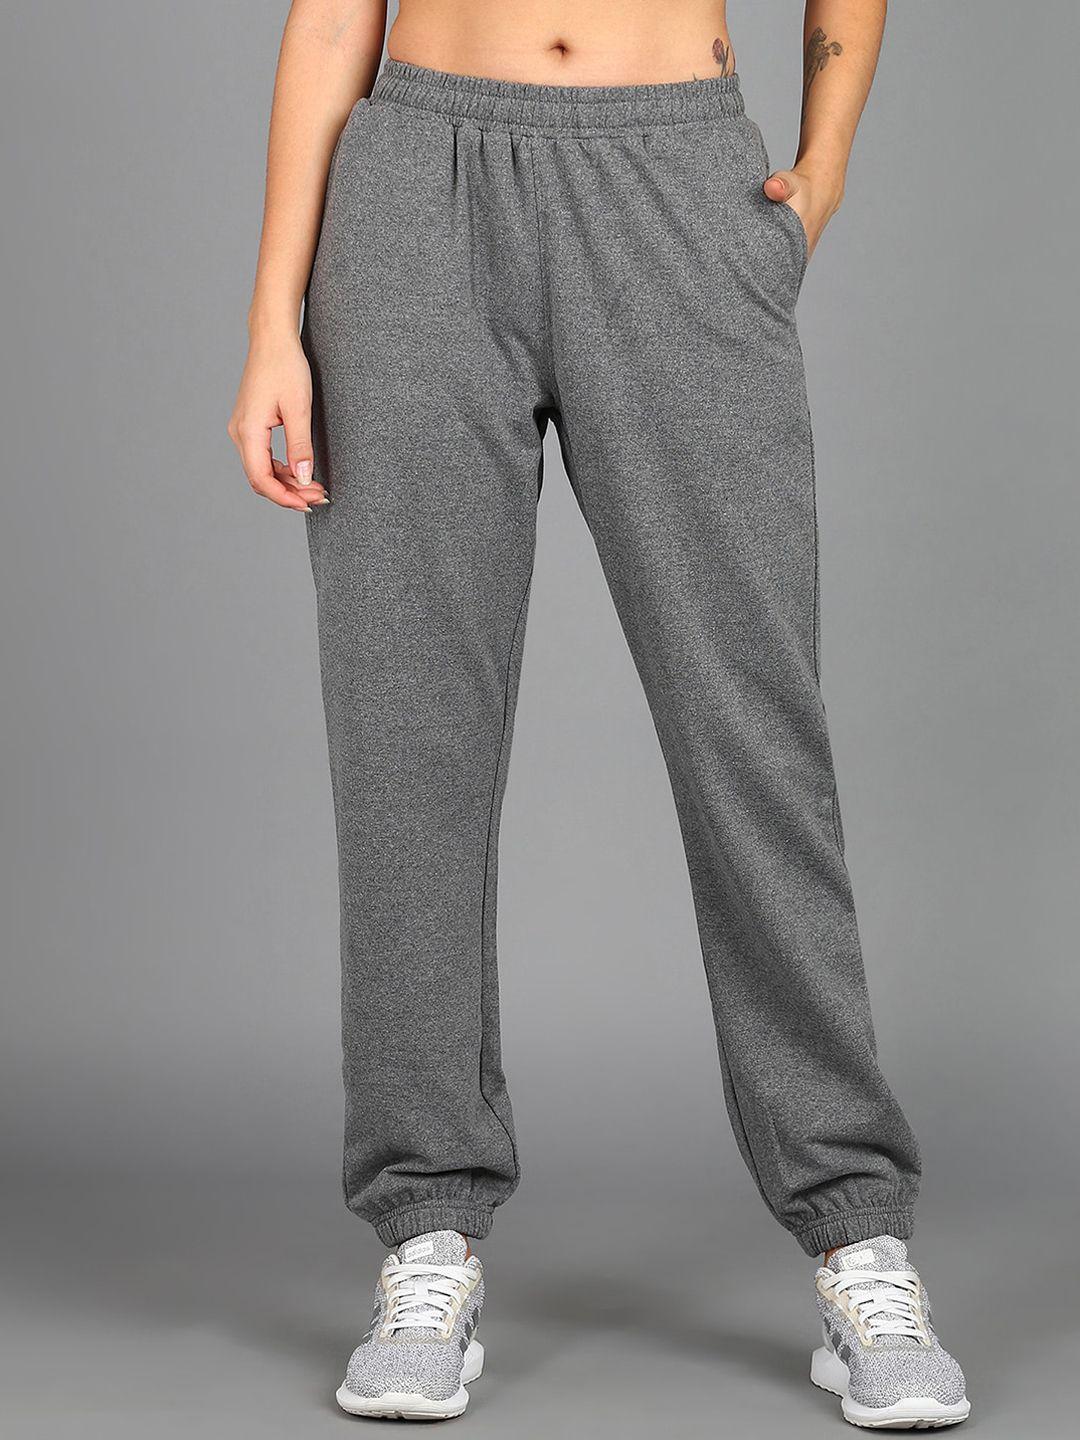 the-roadster-lifestyle-co.-women-mid-rise-fleece-joggers